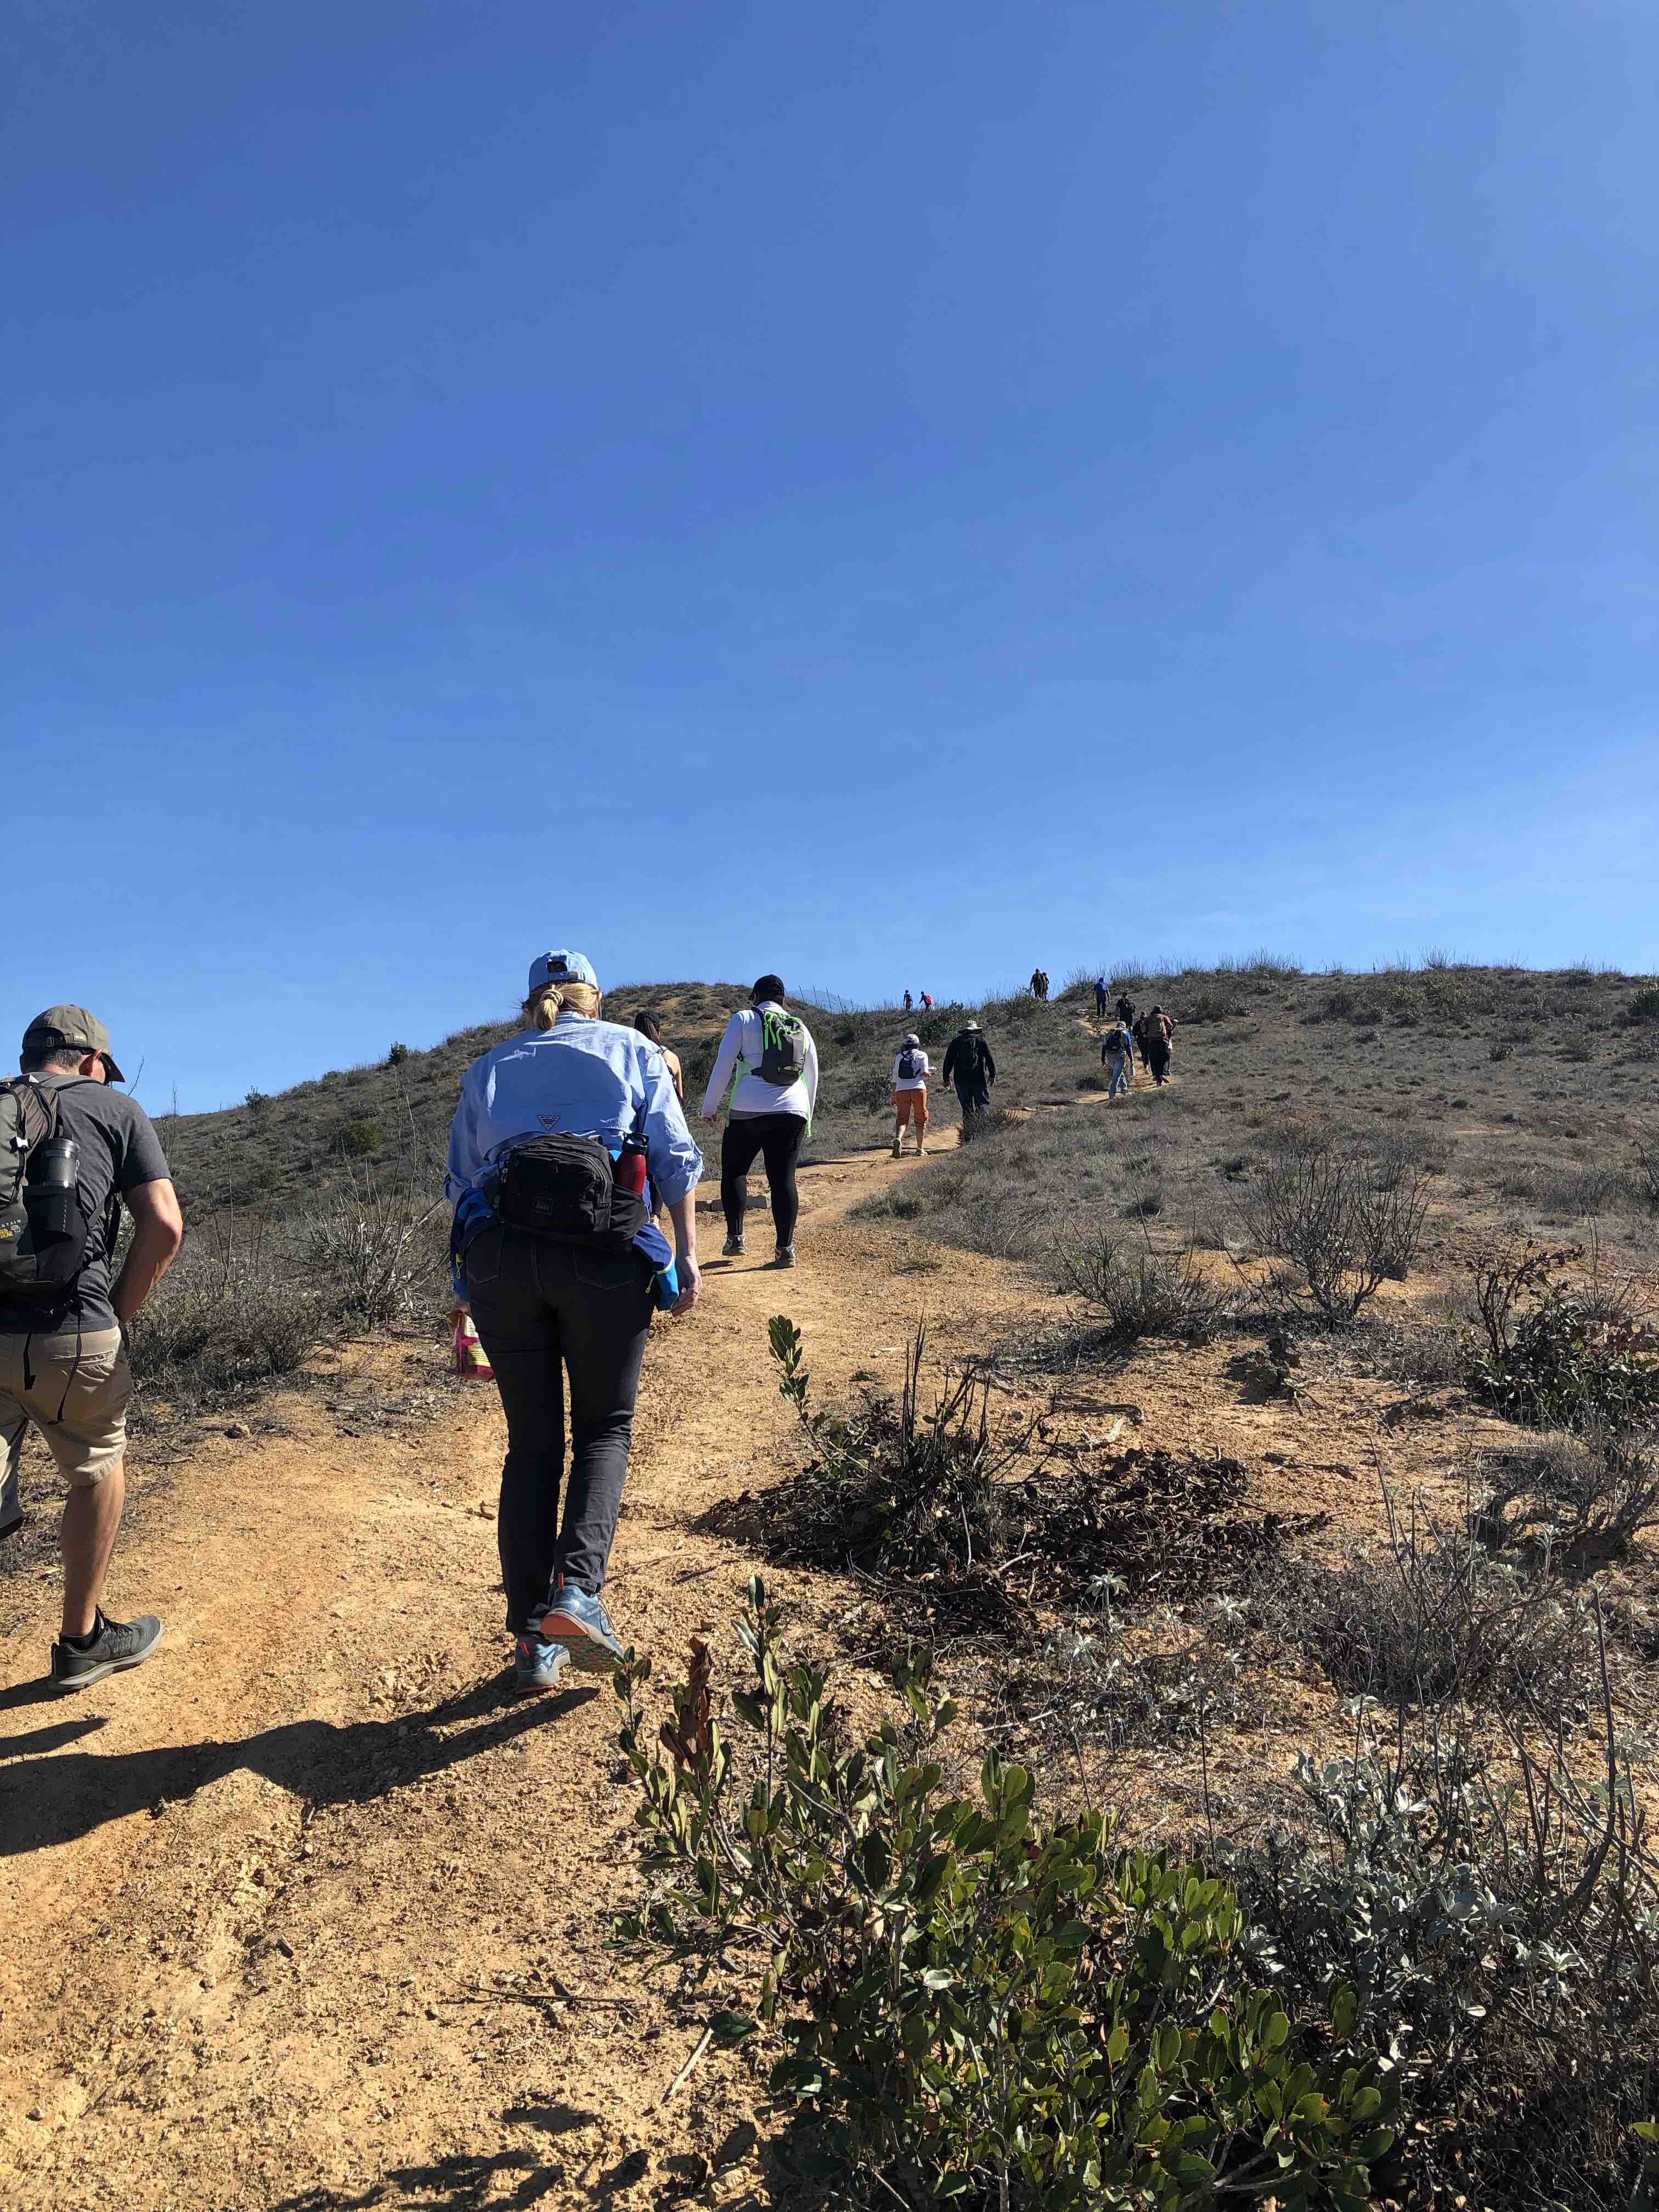 Group of faculty and students hiking up a dusty hillside.